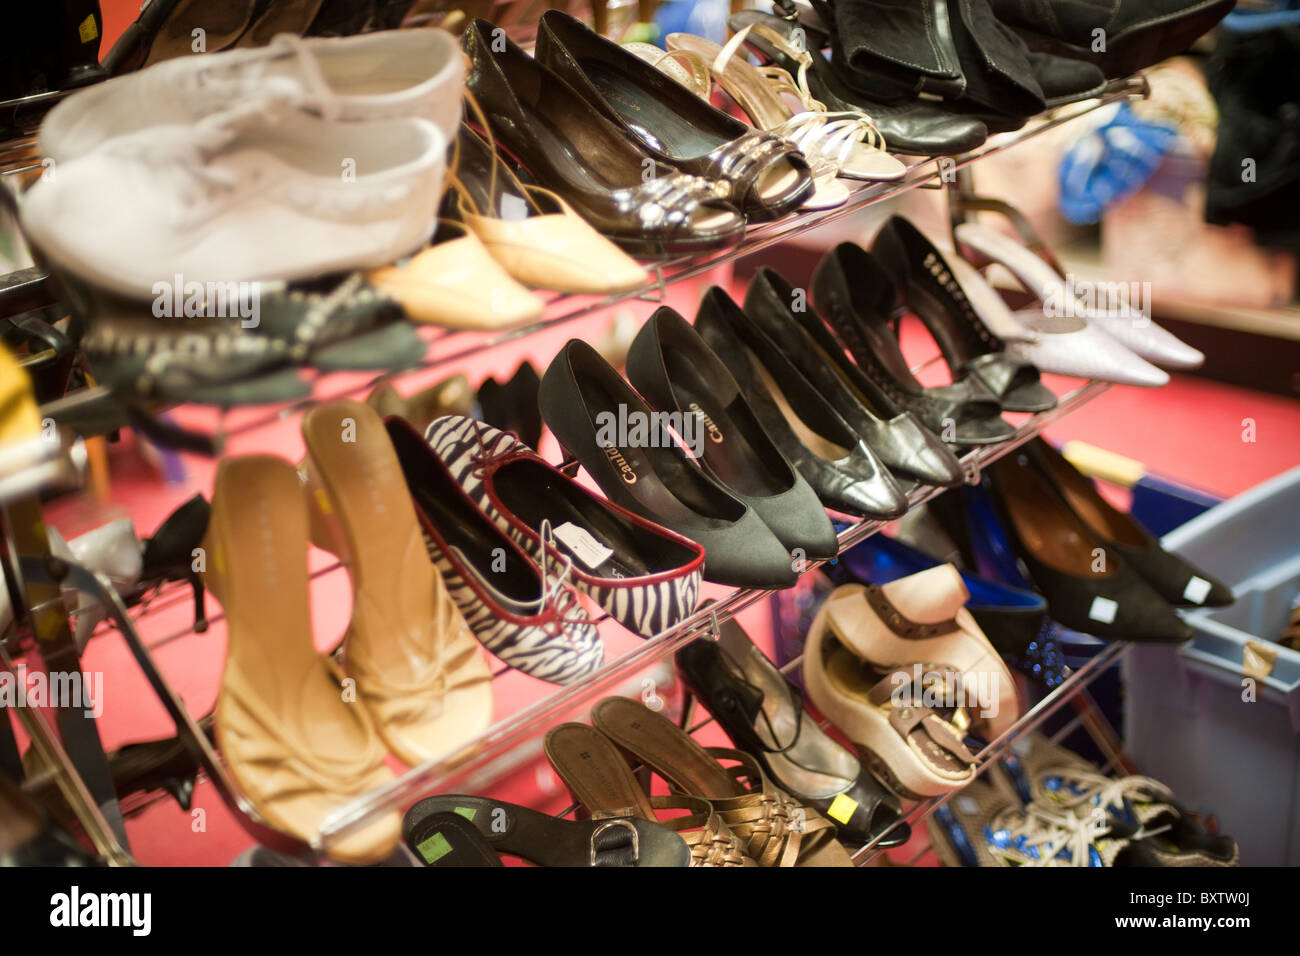 A selection of previously owned shoes in a thrift store in the Chelsea neighborhood of New York Stock Photo